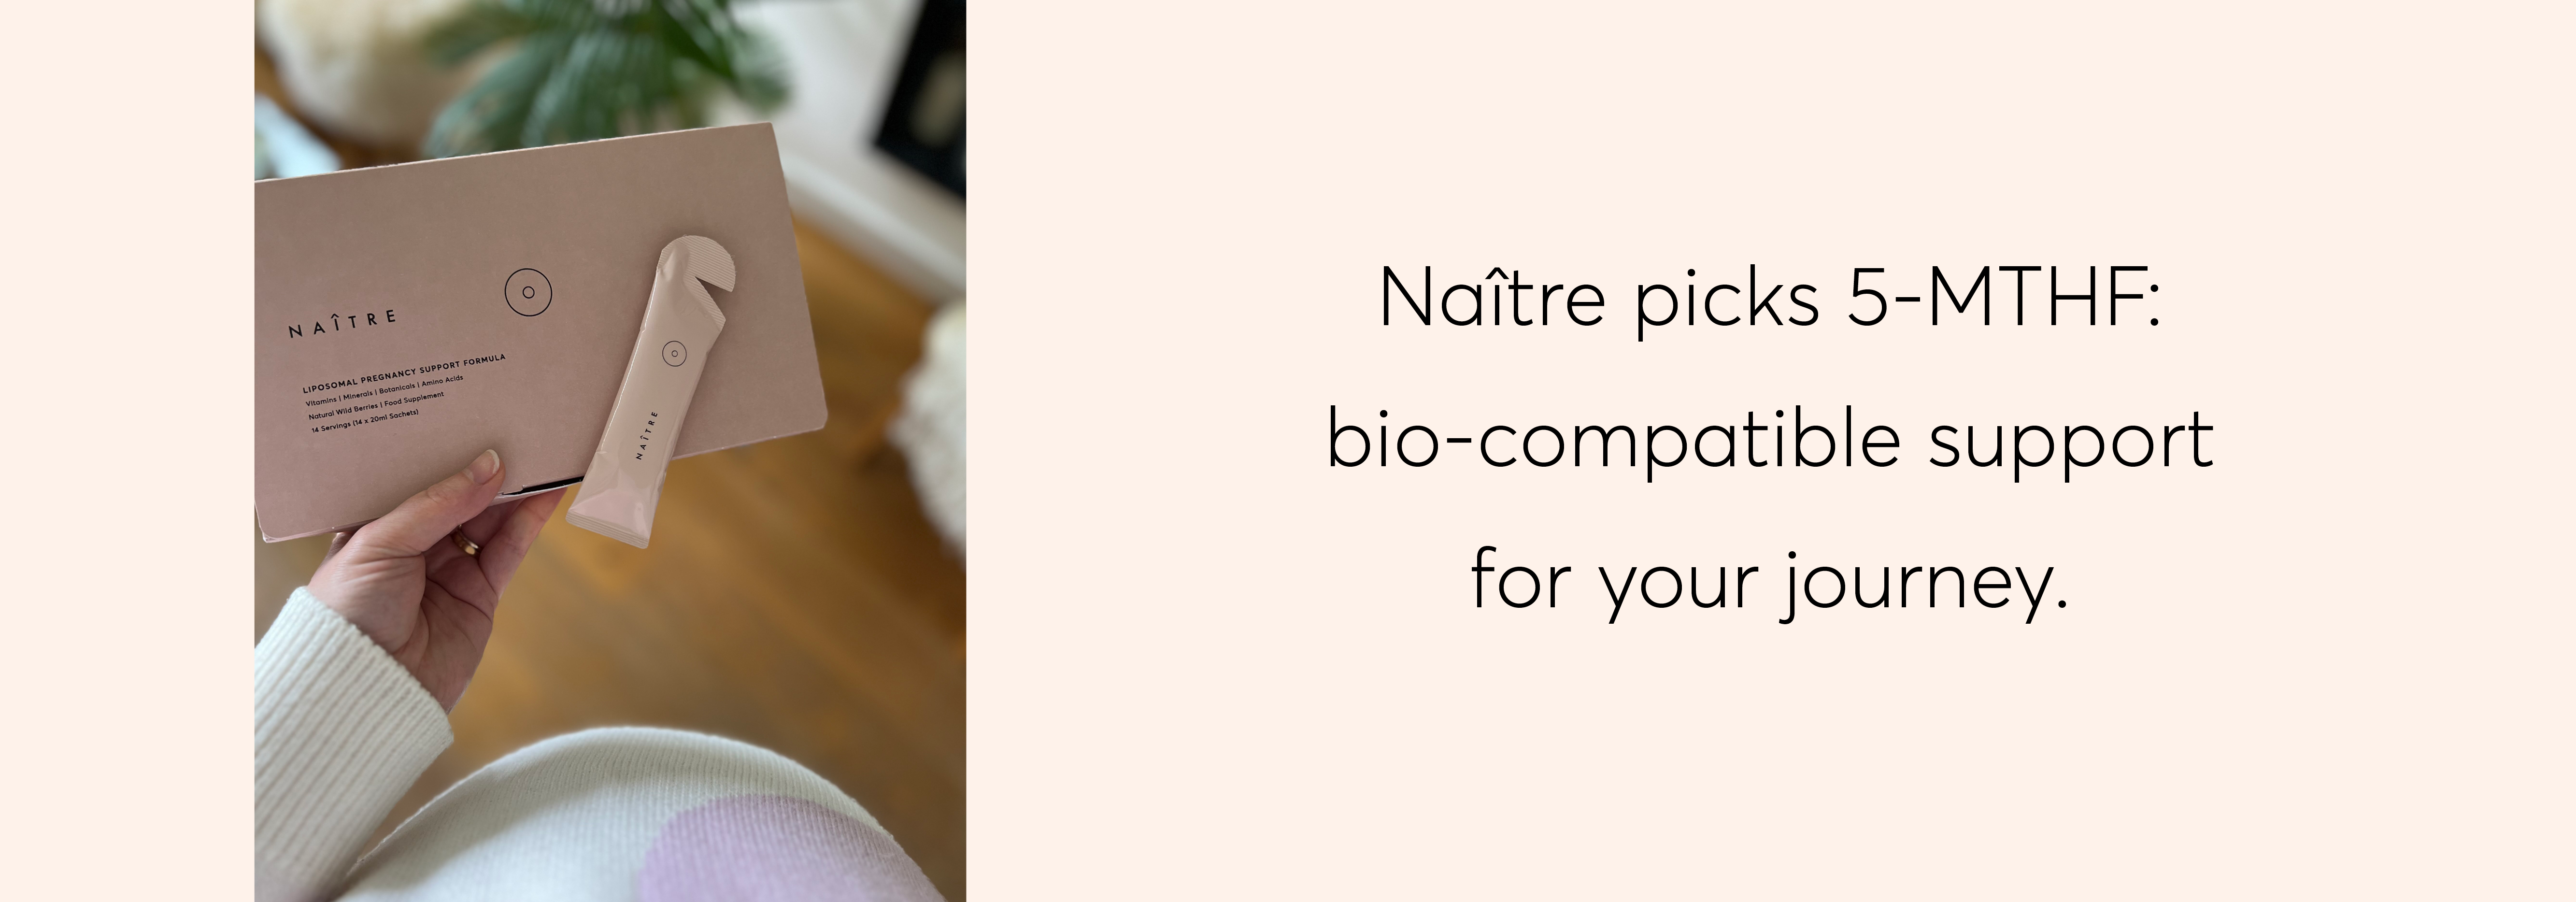 Naître picks 5-MTHF: bio-compatible support for your journey.